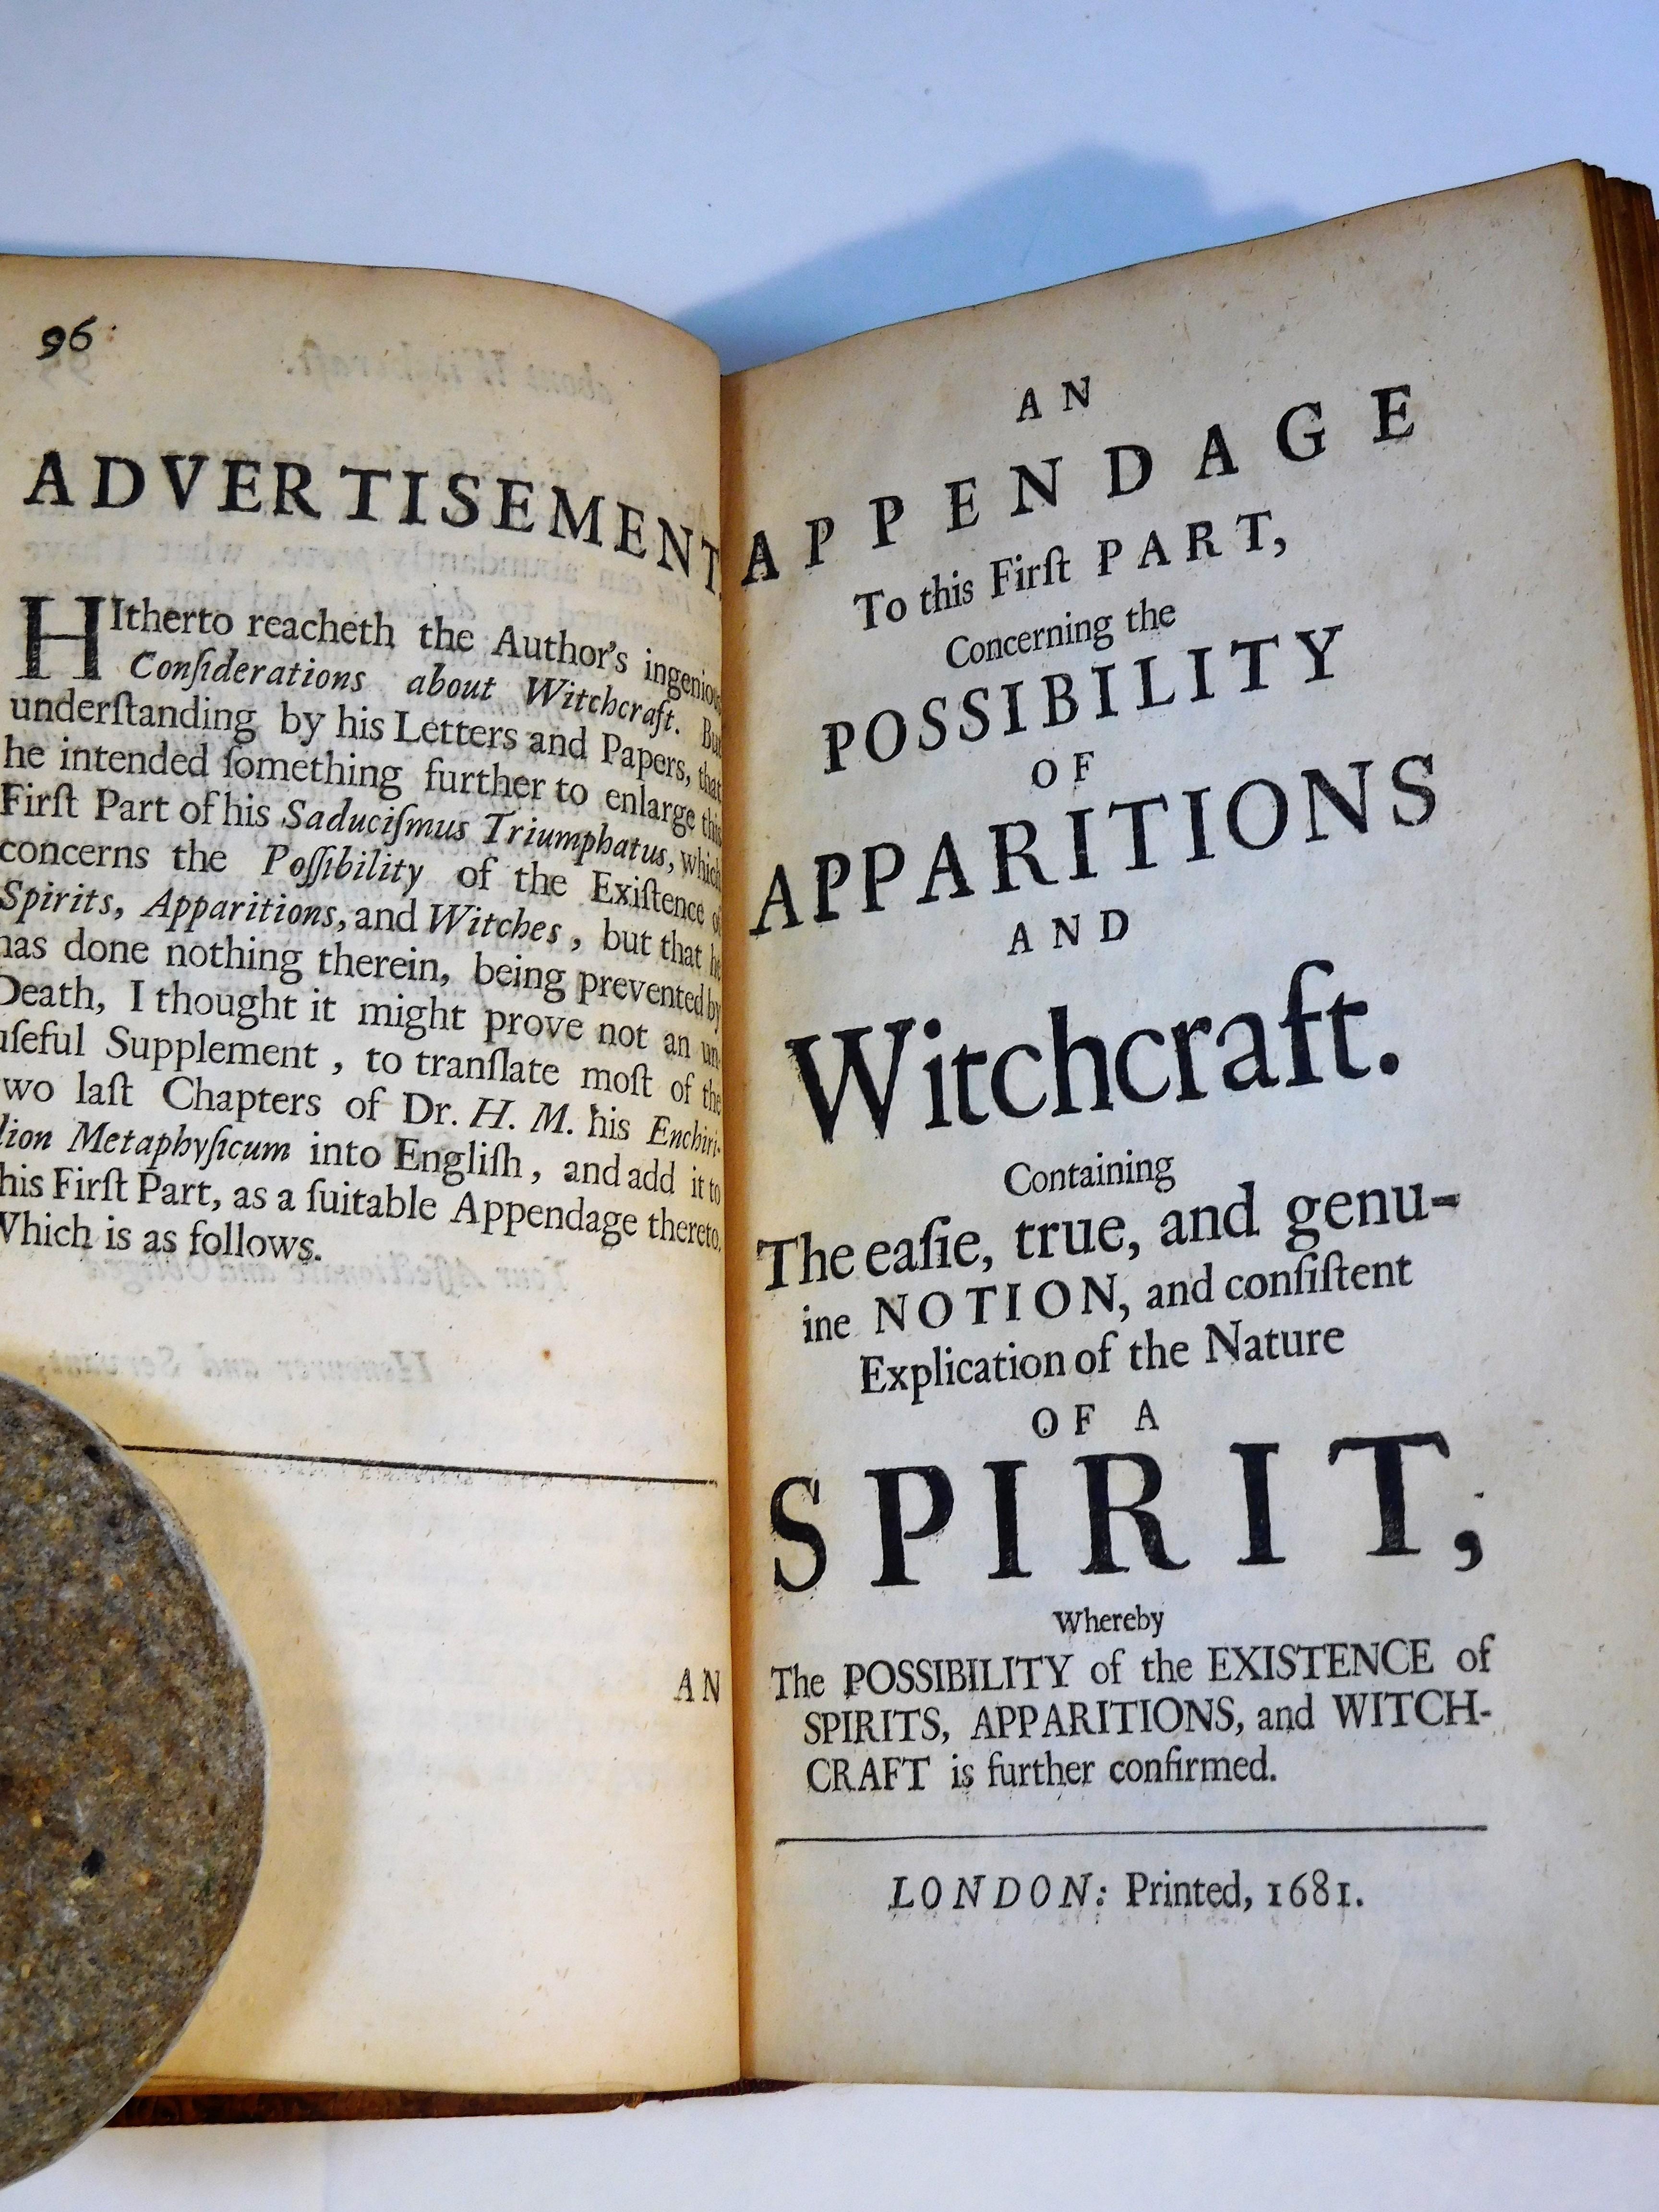 Glanvil's Book on the Real Existence of Witches, 